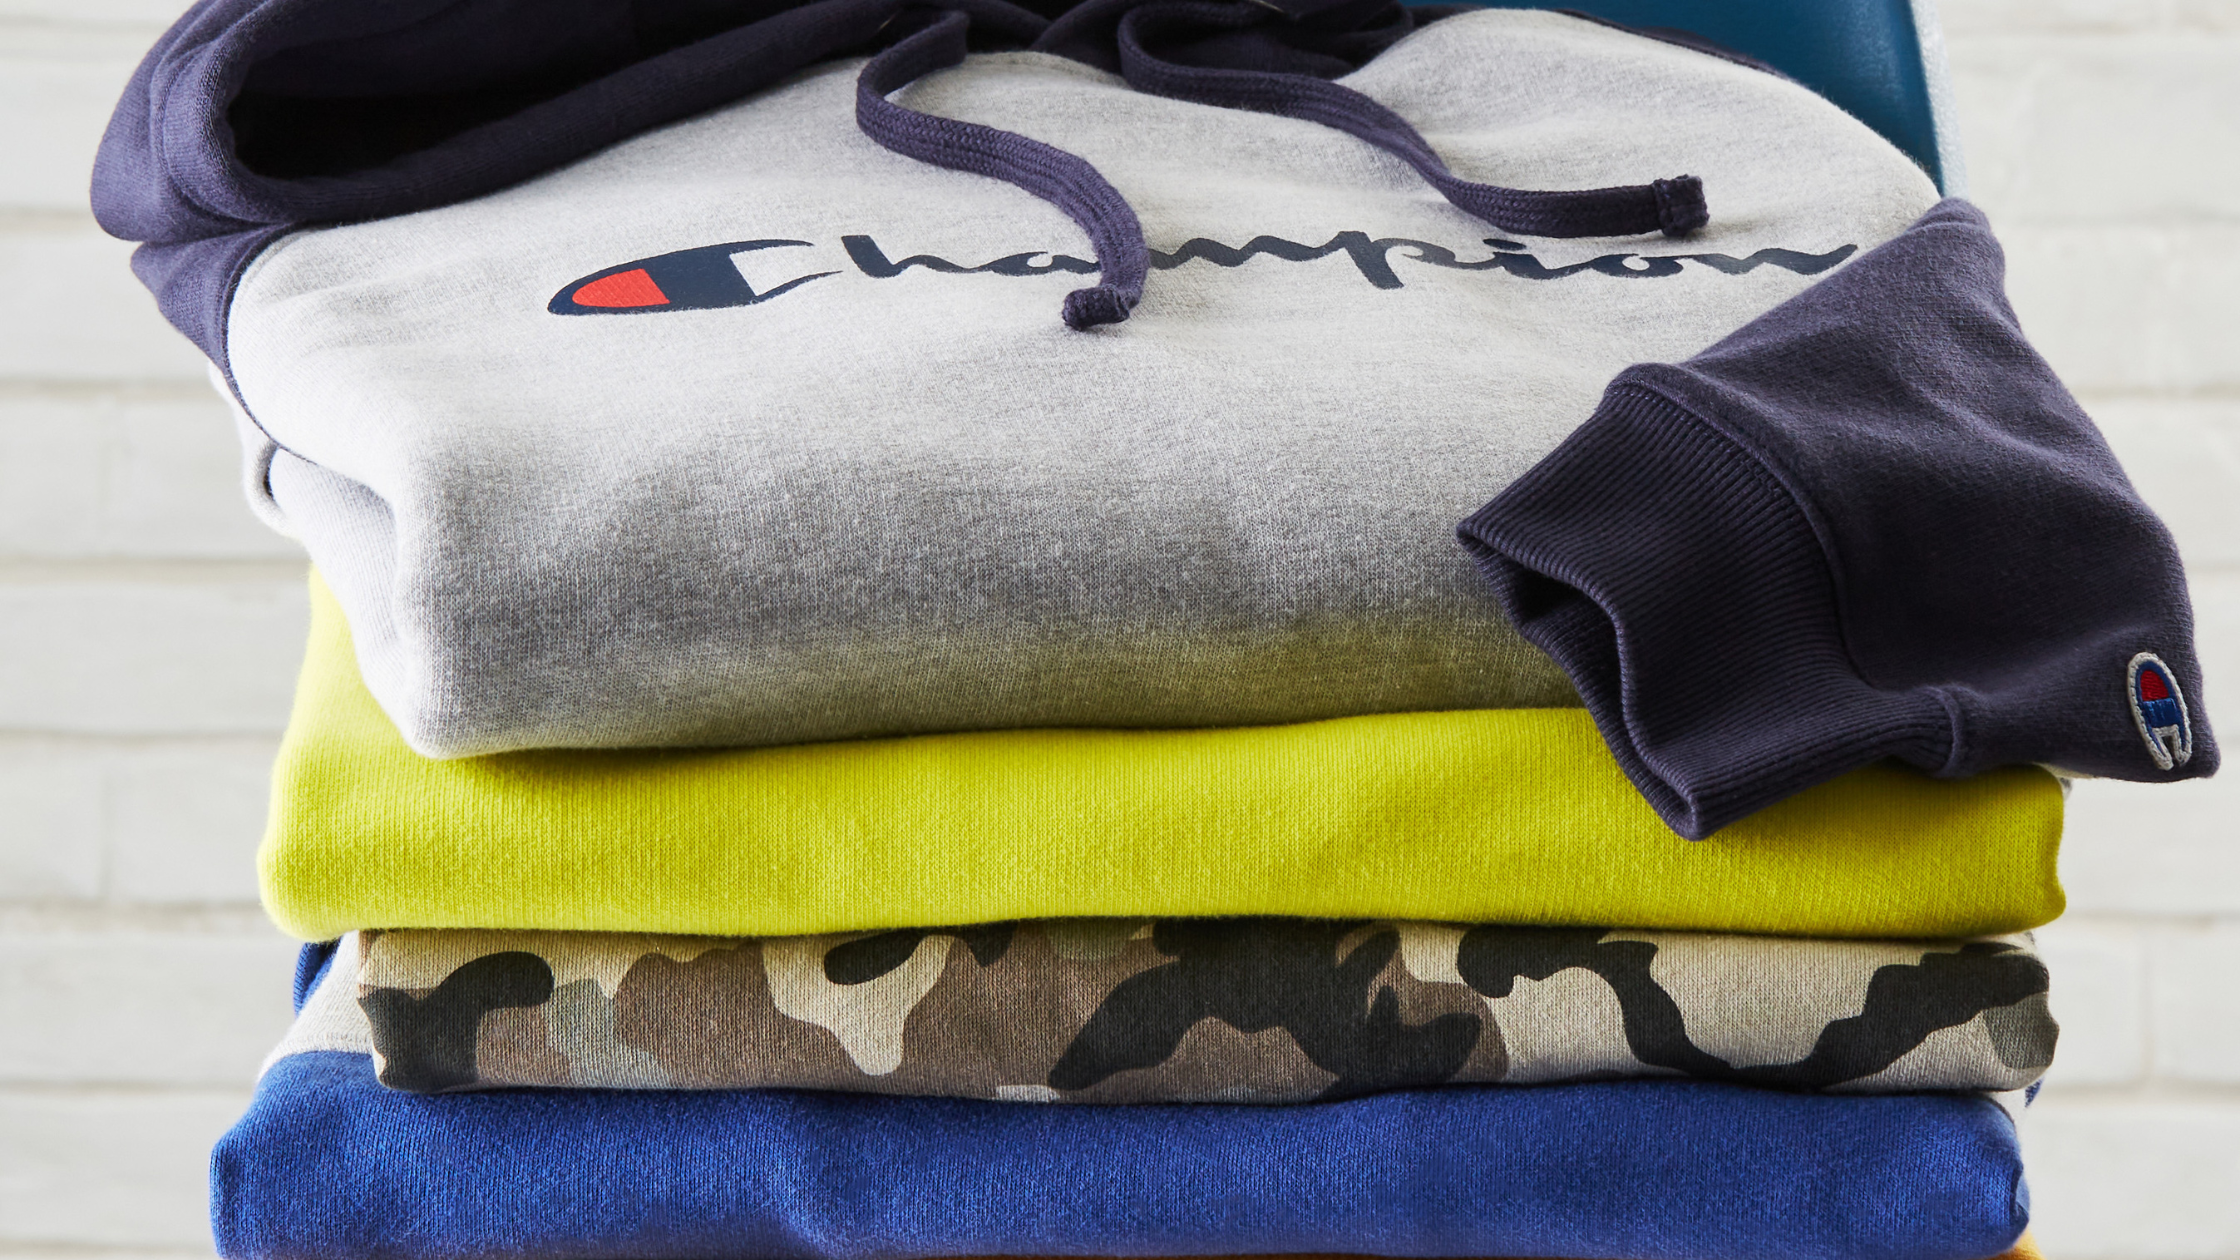 Champion Apparel Buyer's Guide  About the brand, history & sizing